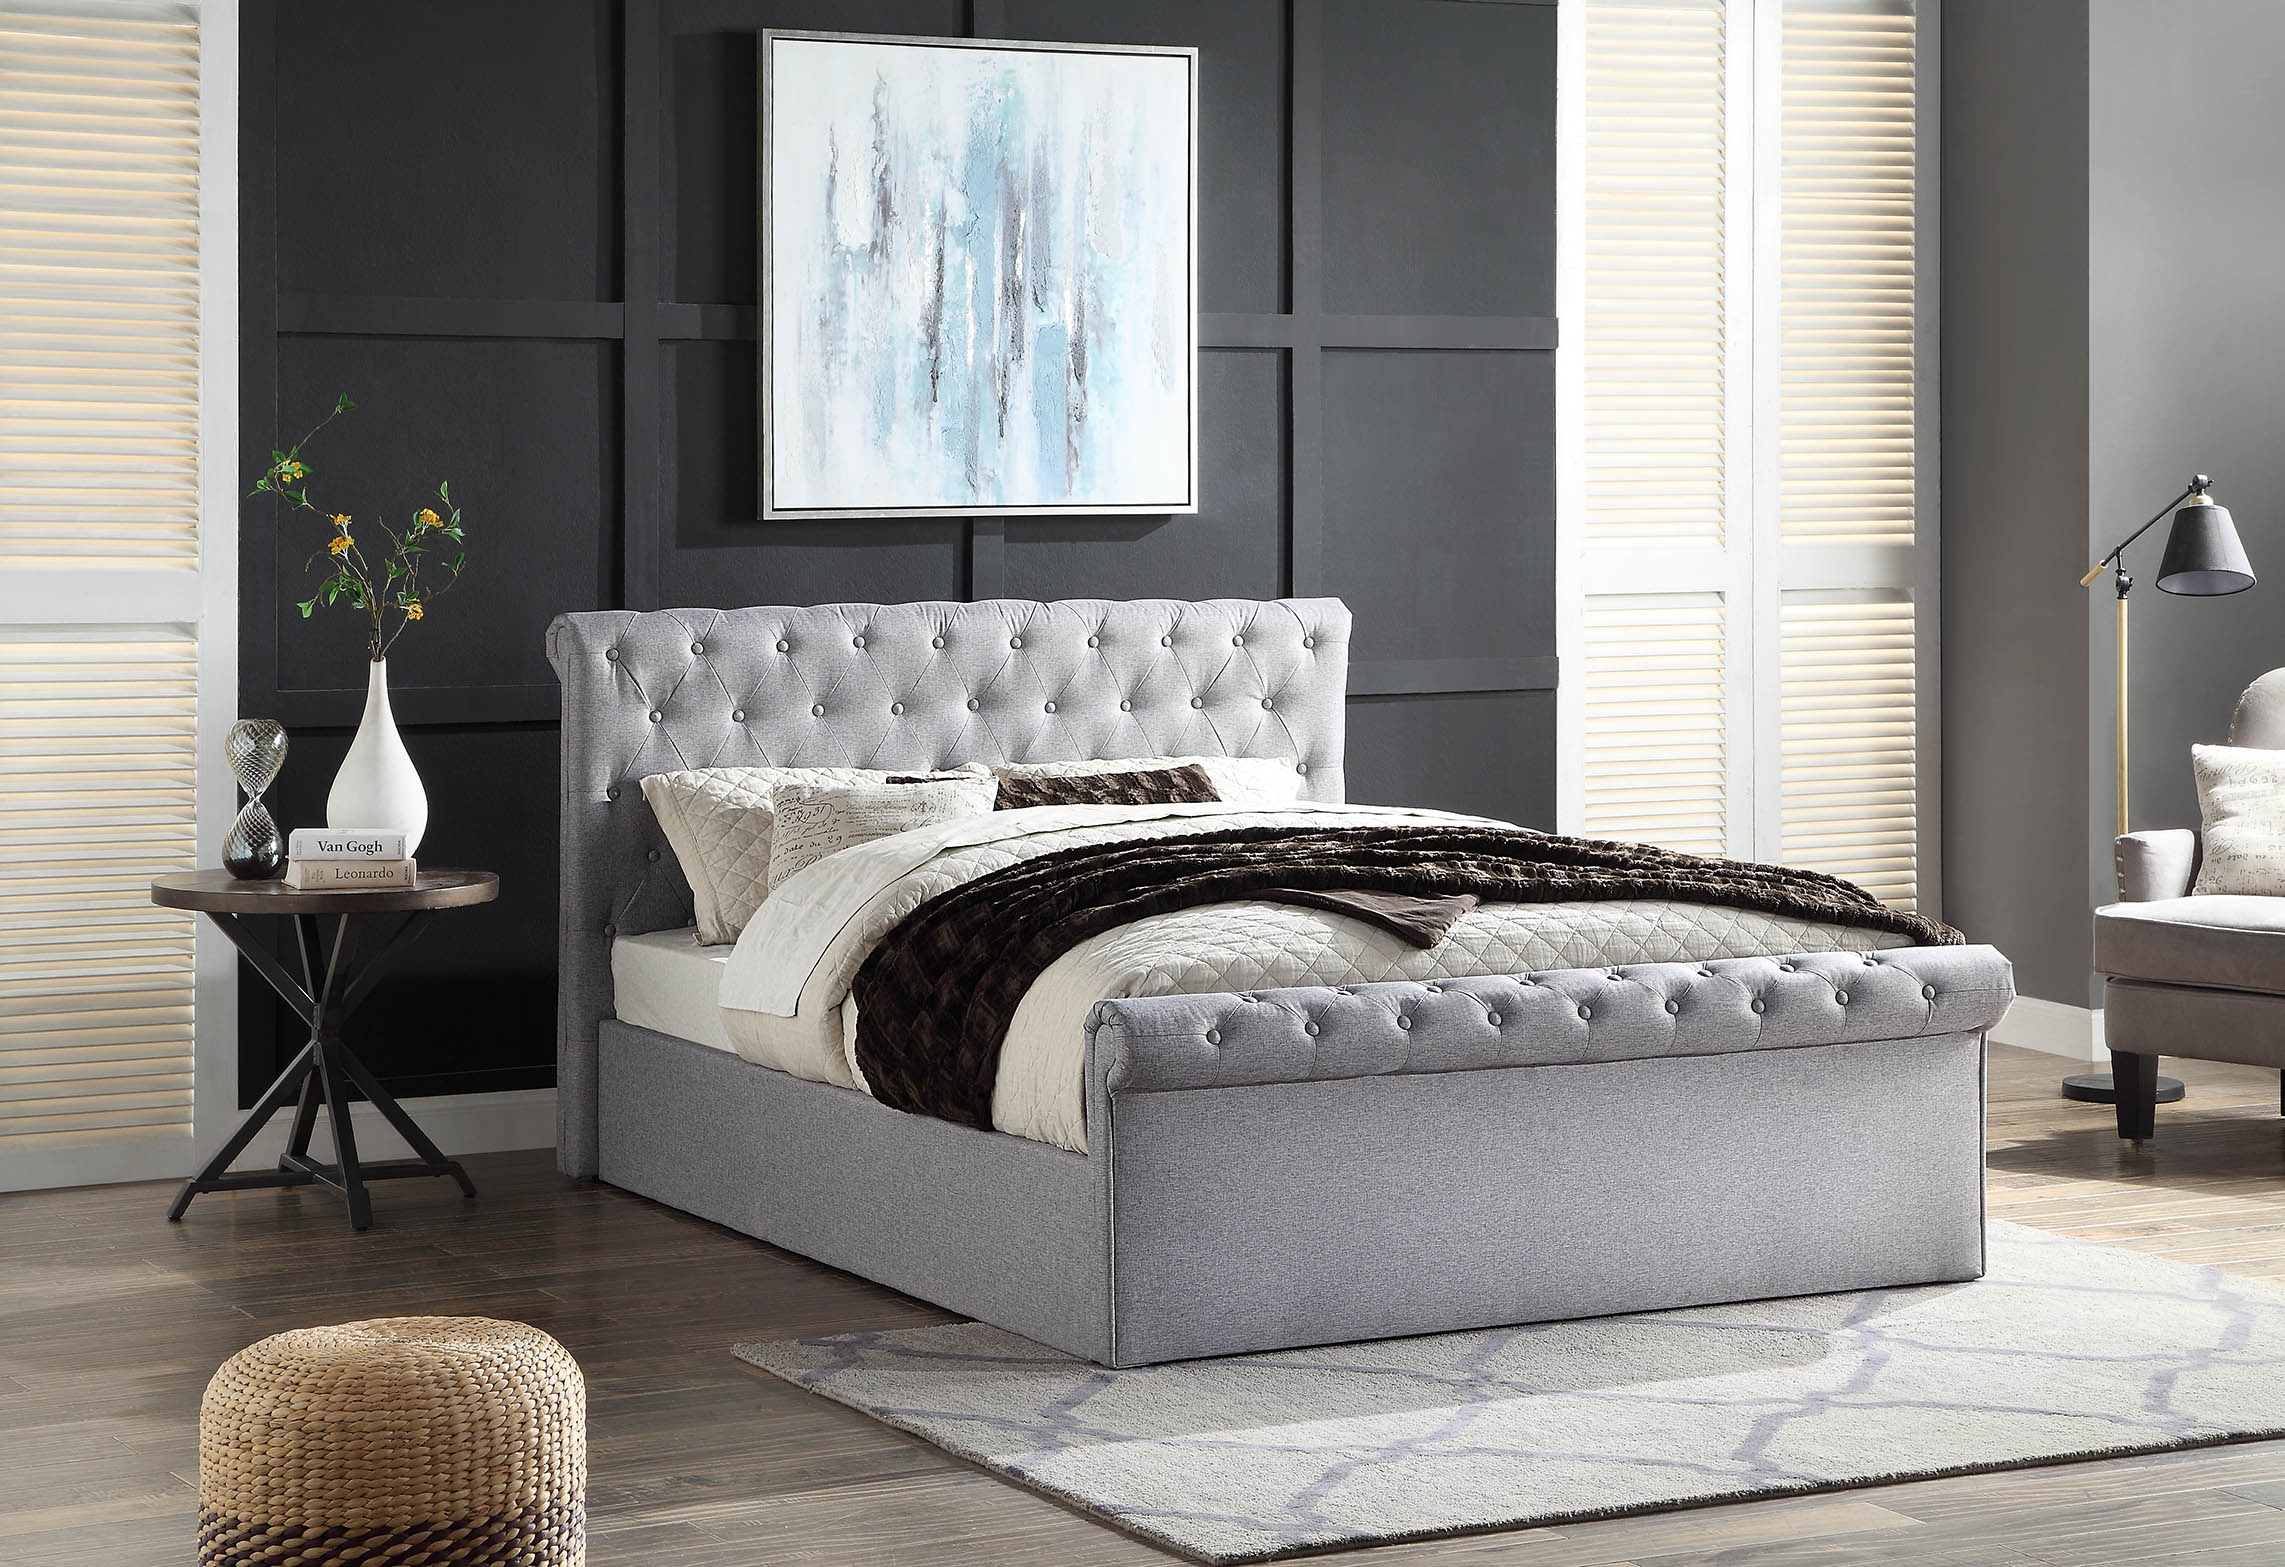 Winfield King Ottoman Bed Frame With, Lift Up Storage Bed King